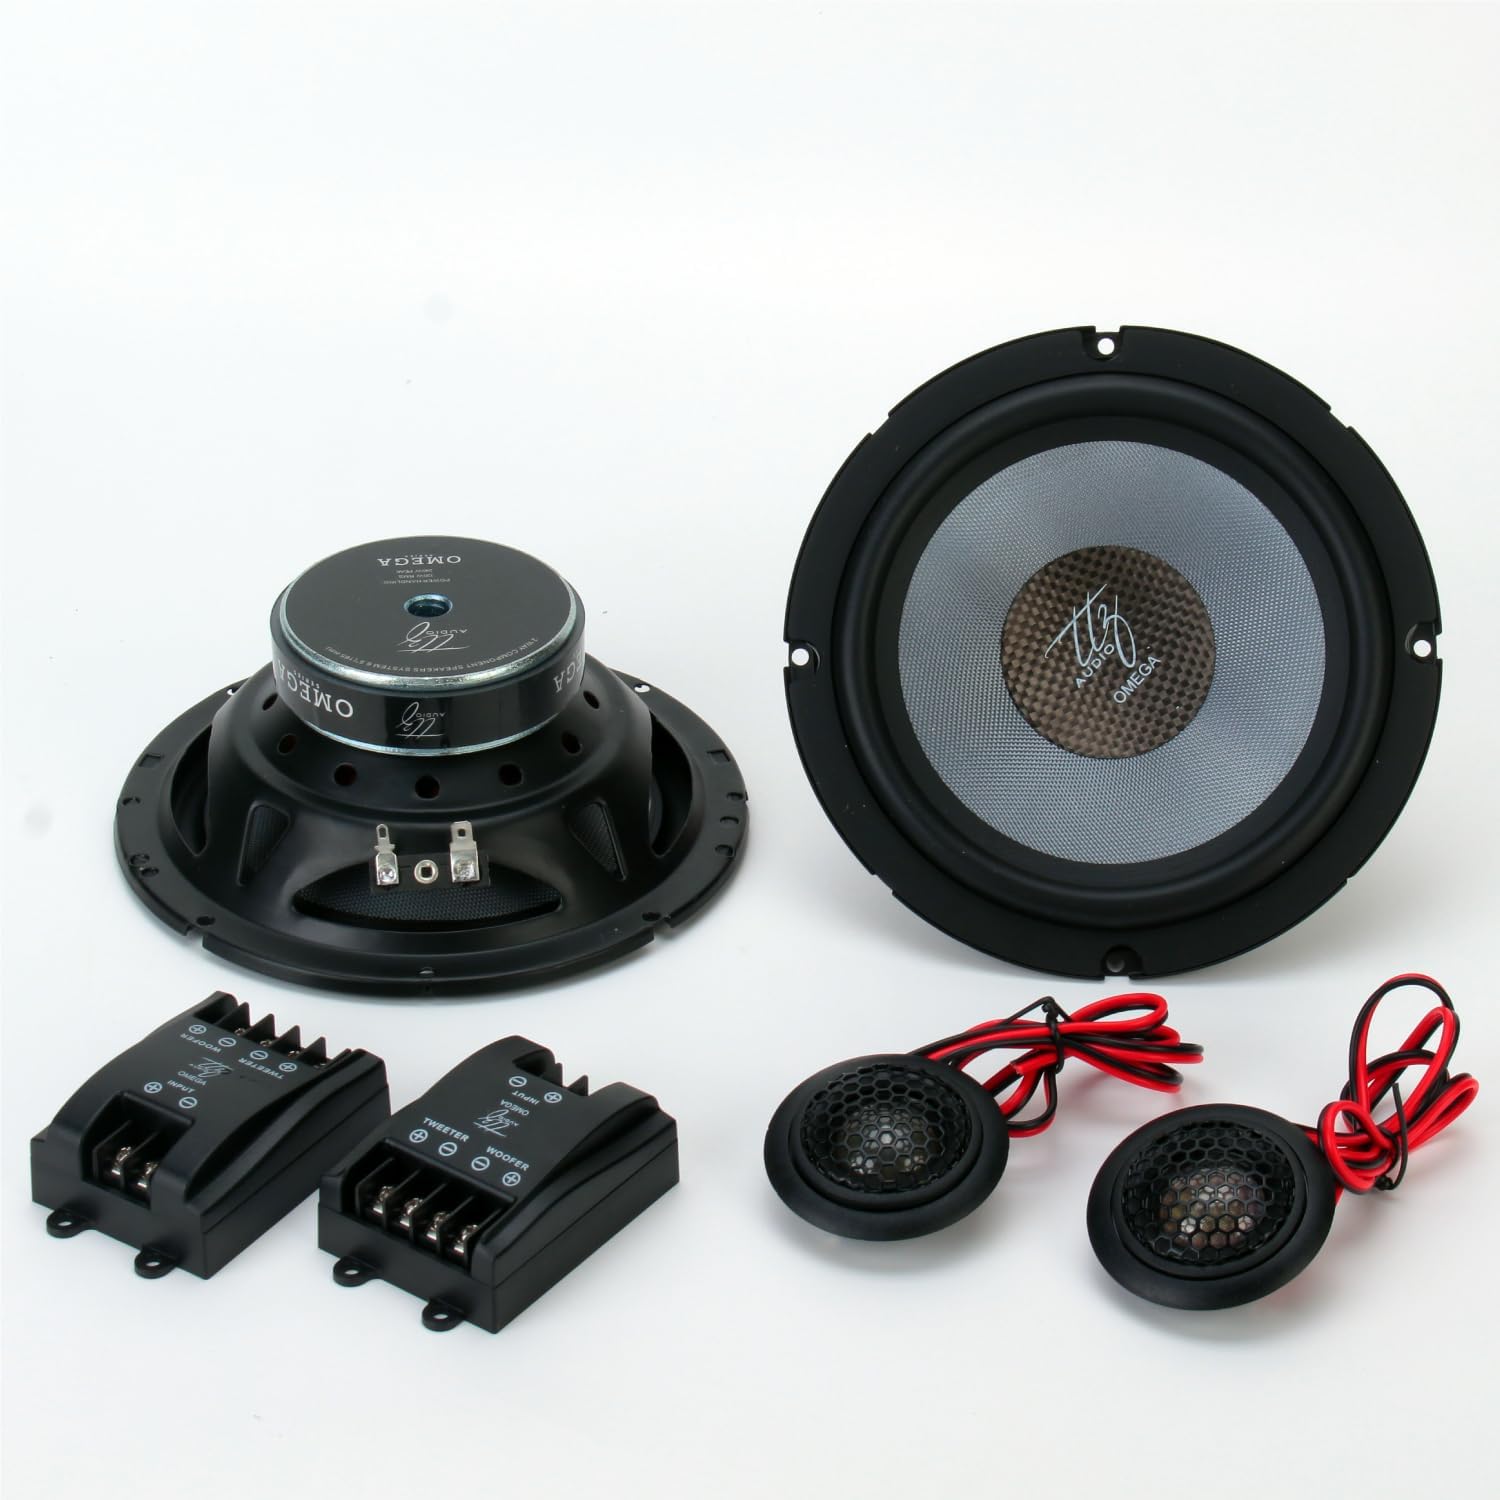 Omega Series Car Audio 6.5" Inch 2-Way Component Speakers Set